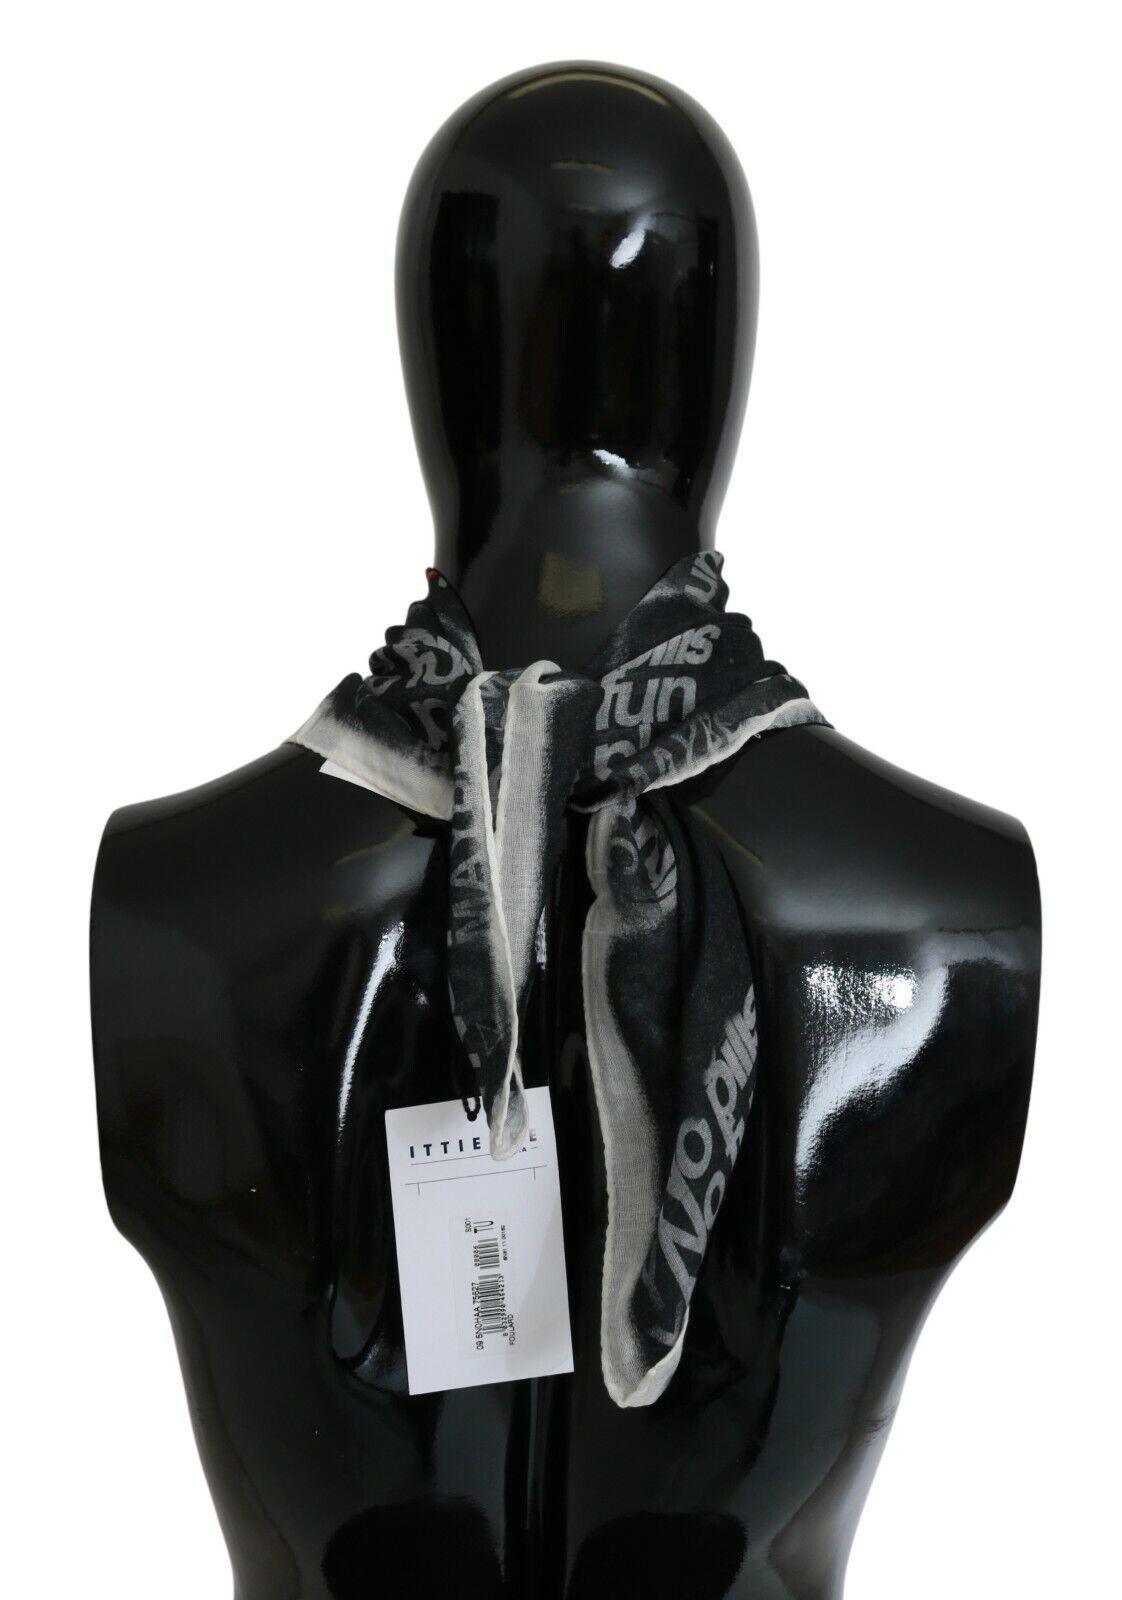 Costume National Dark Grey Wool Foulard Branded Scarf - Designed by Costume National Available to Buy at a Discounted Price on Moon Behind The Hill Online Designer Discount Store